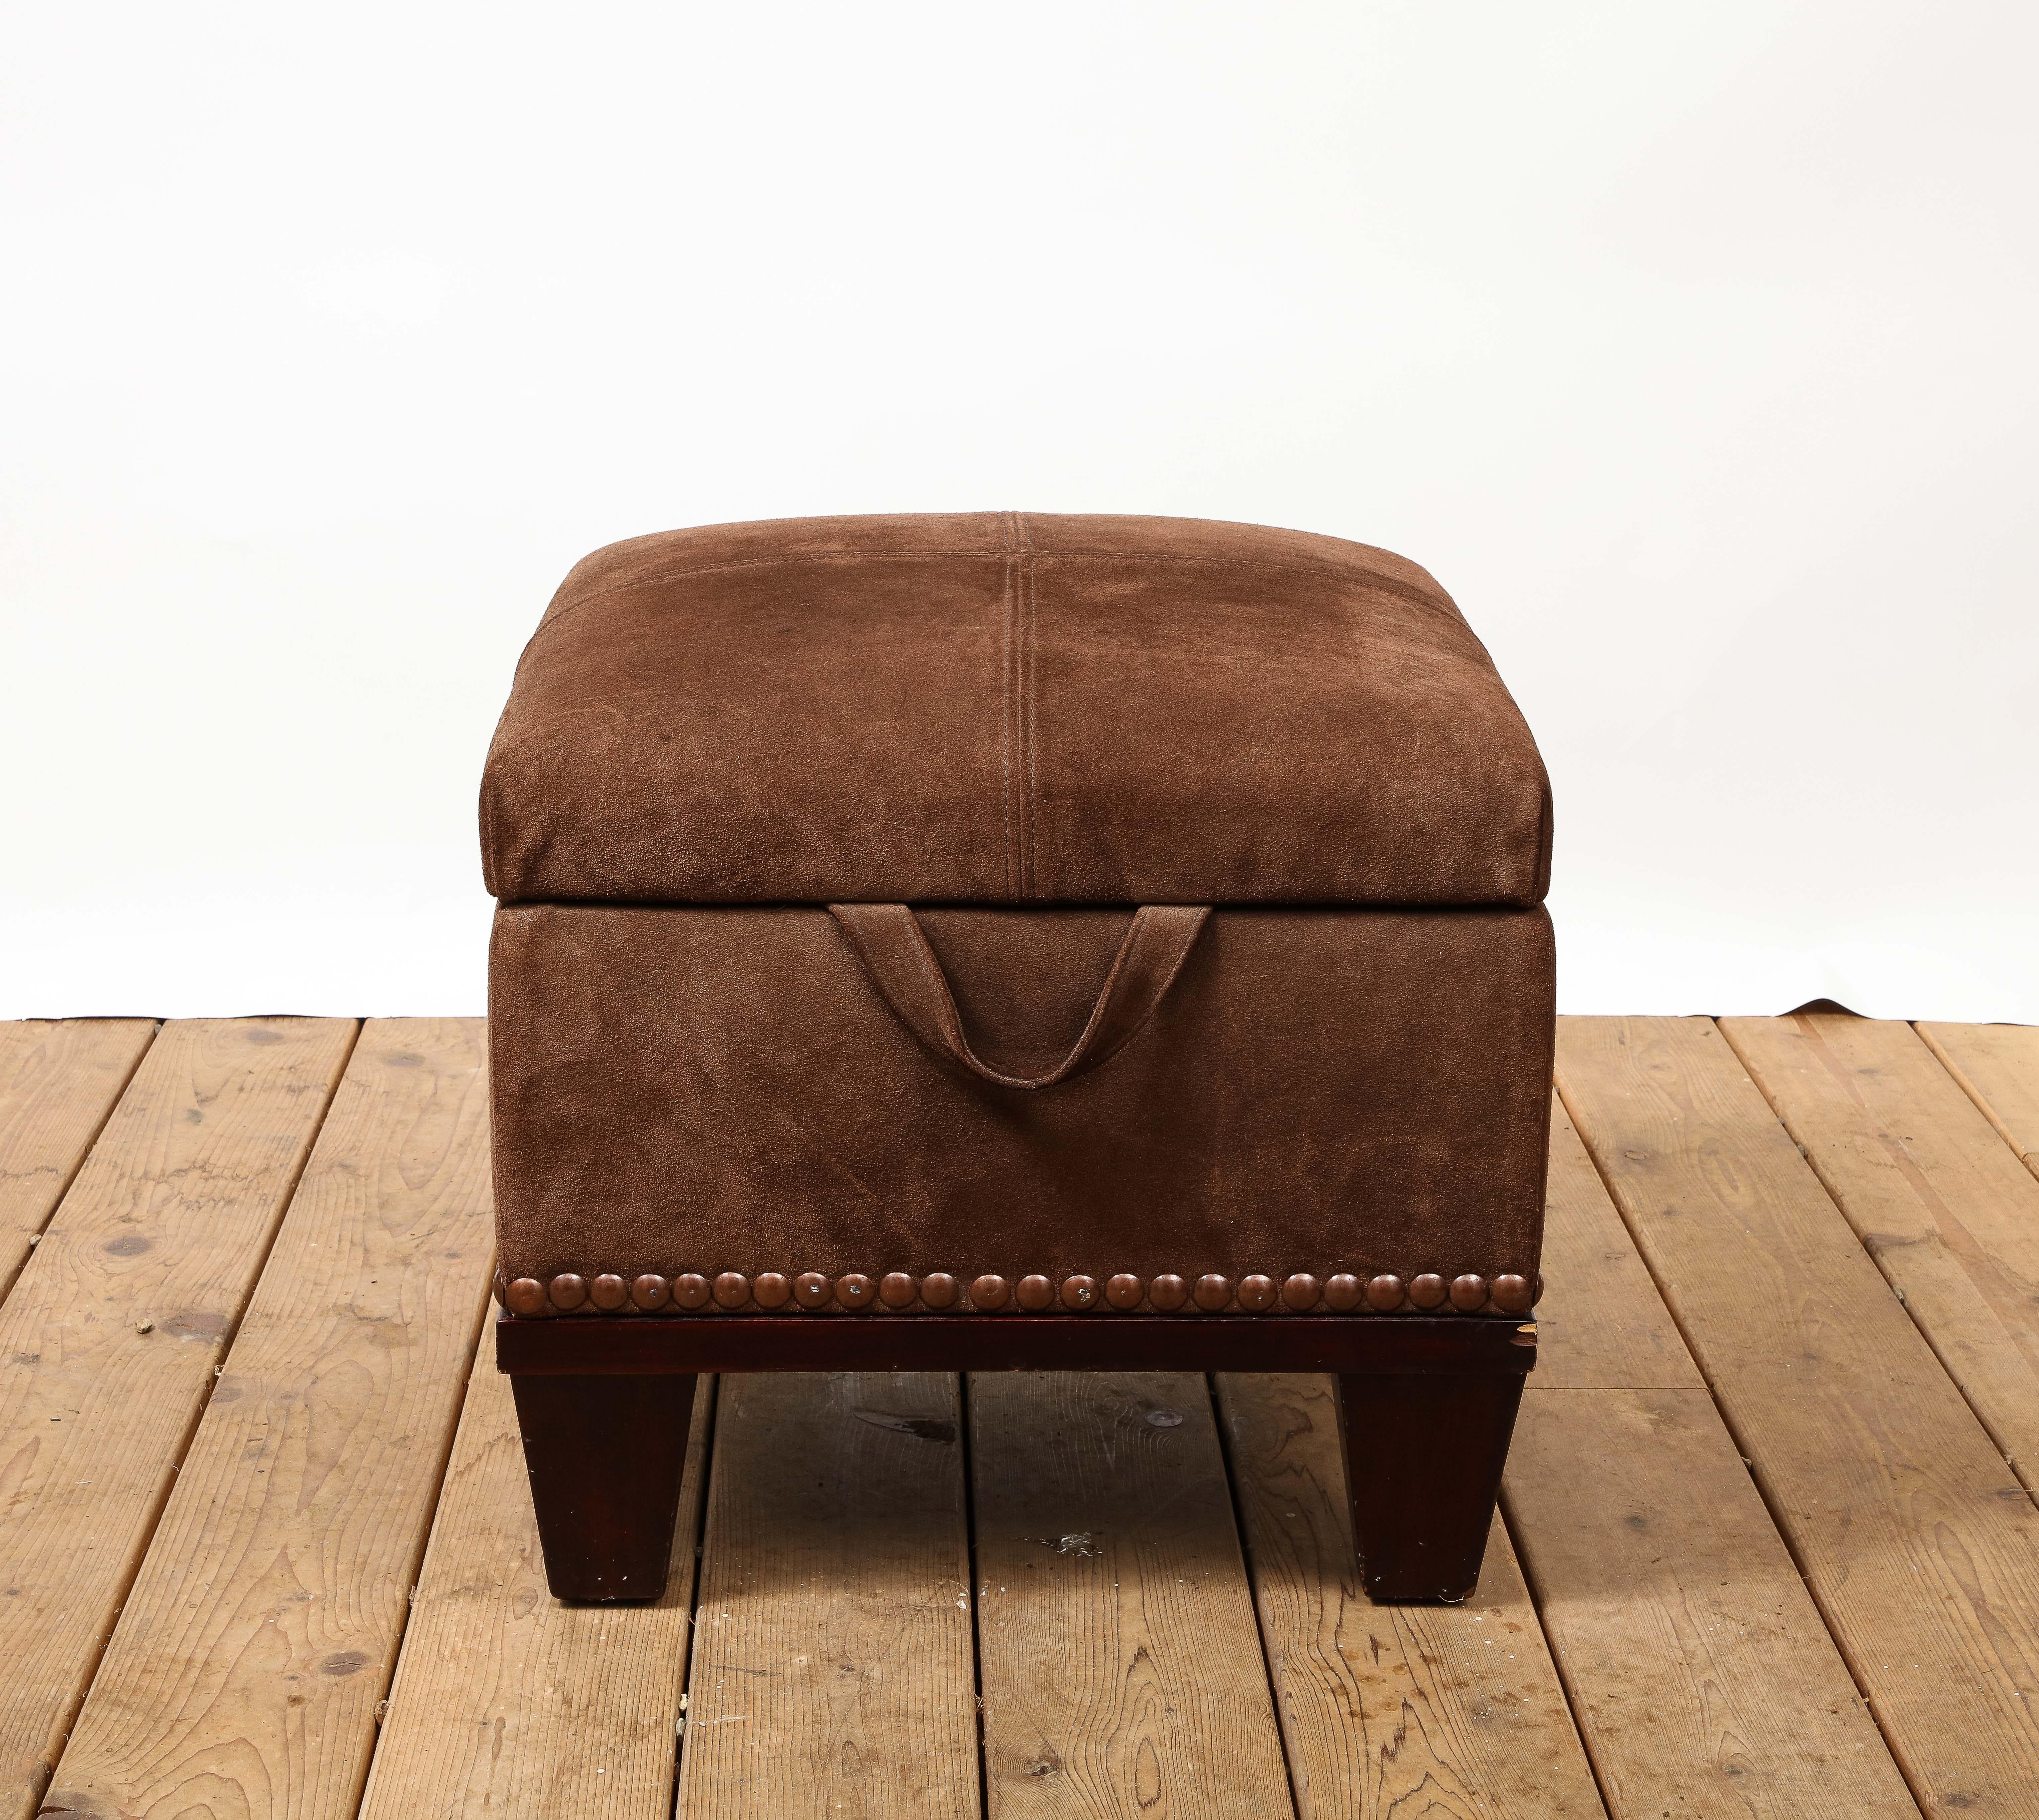 20th Century George Smith Brown Suede Baby Moderne Empire Chest Storage Ottoman  For Sale